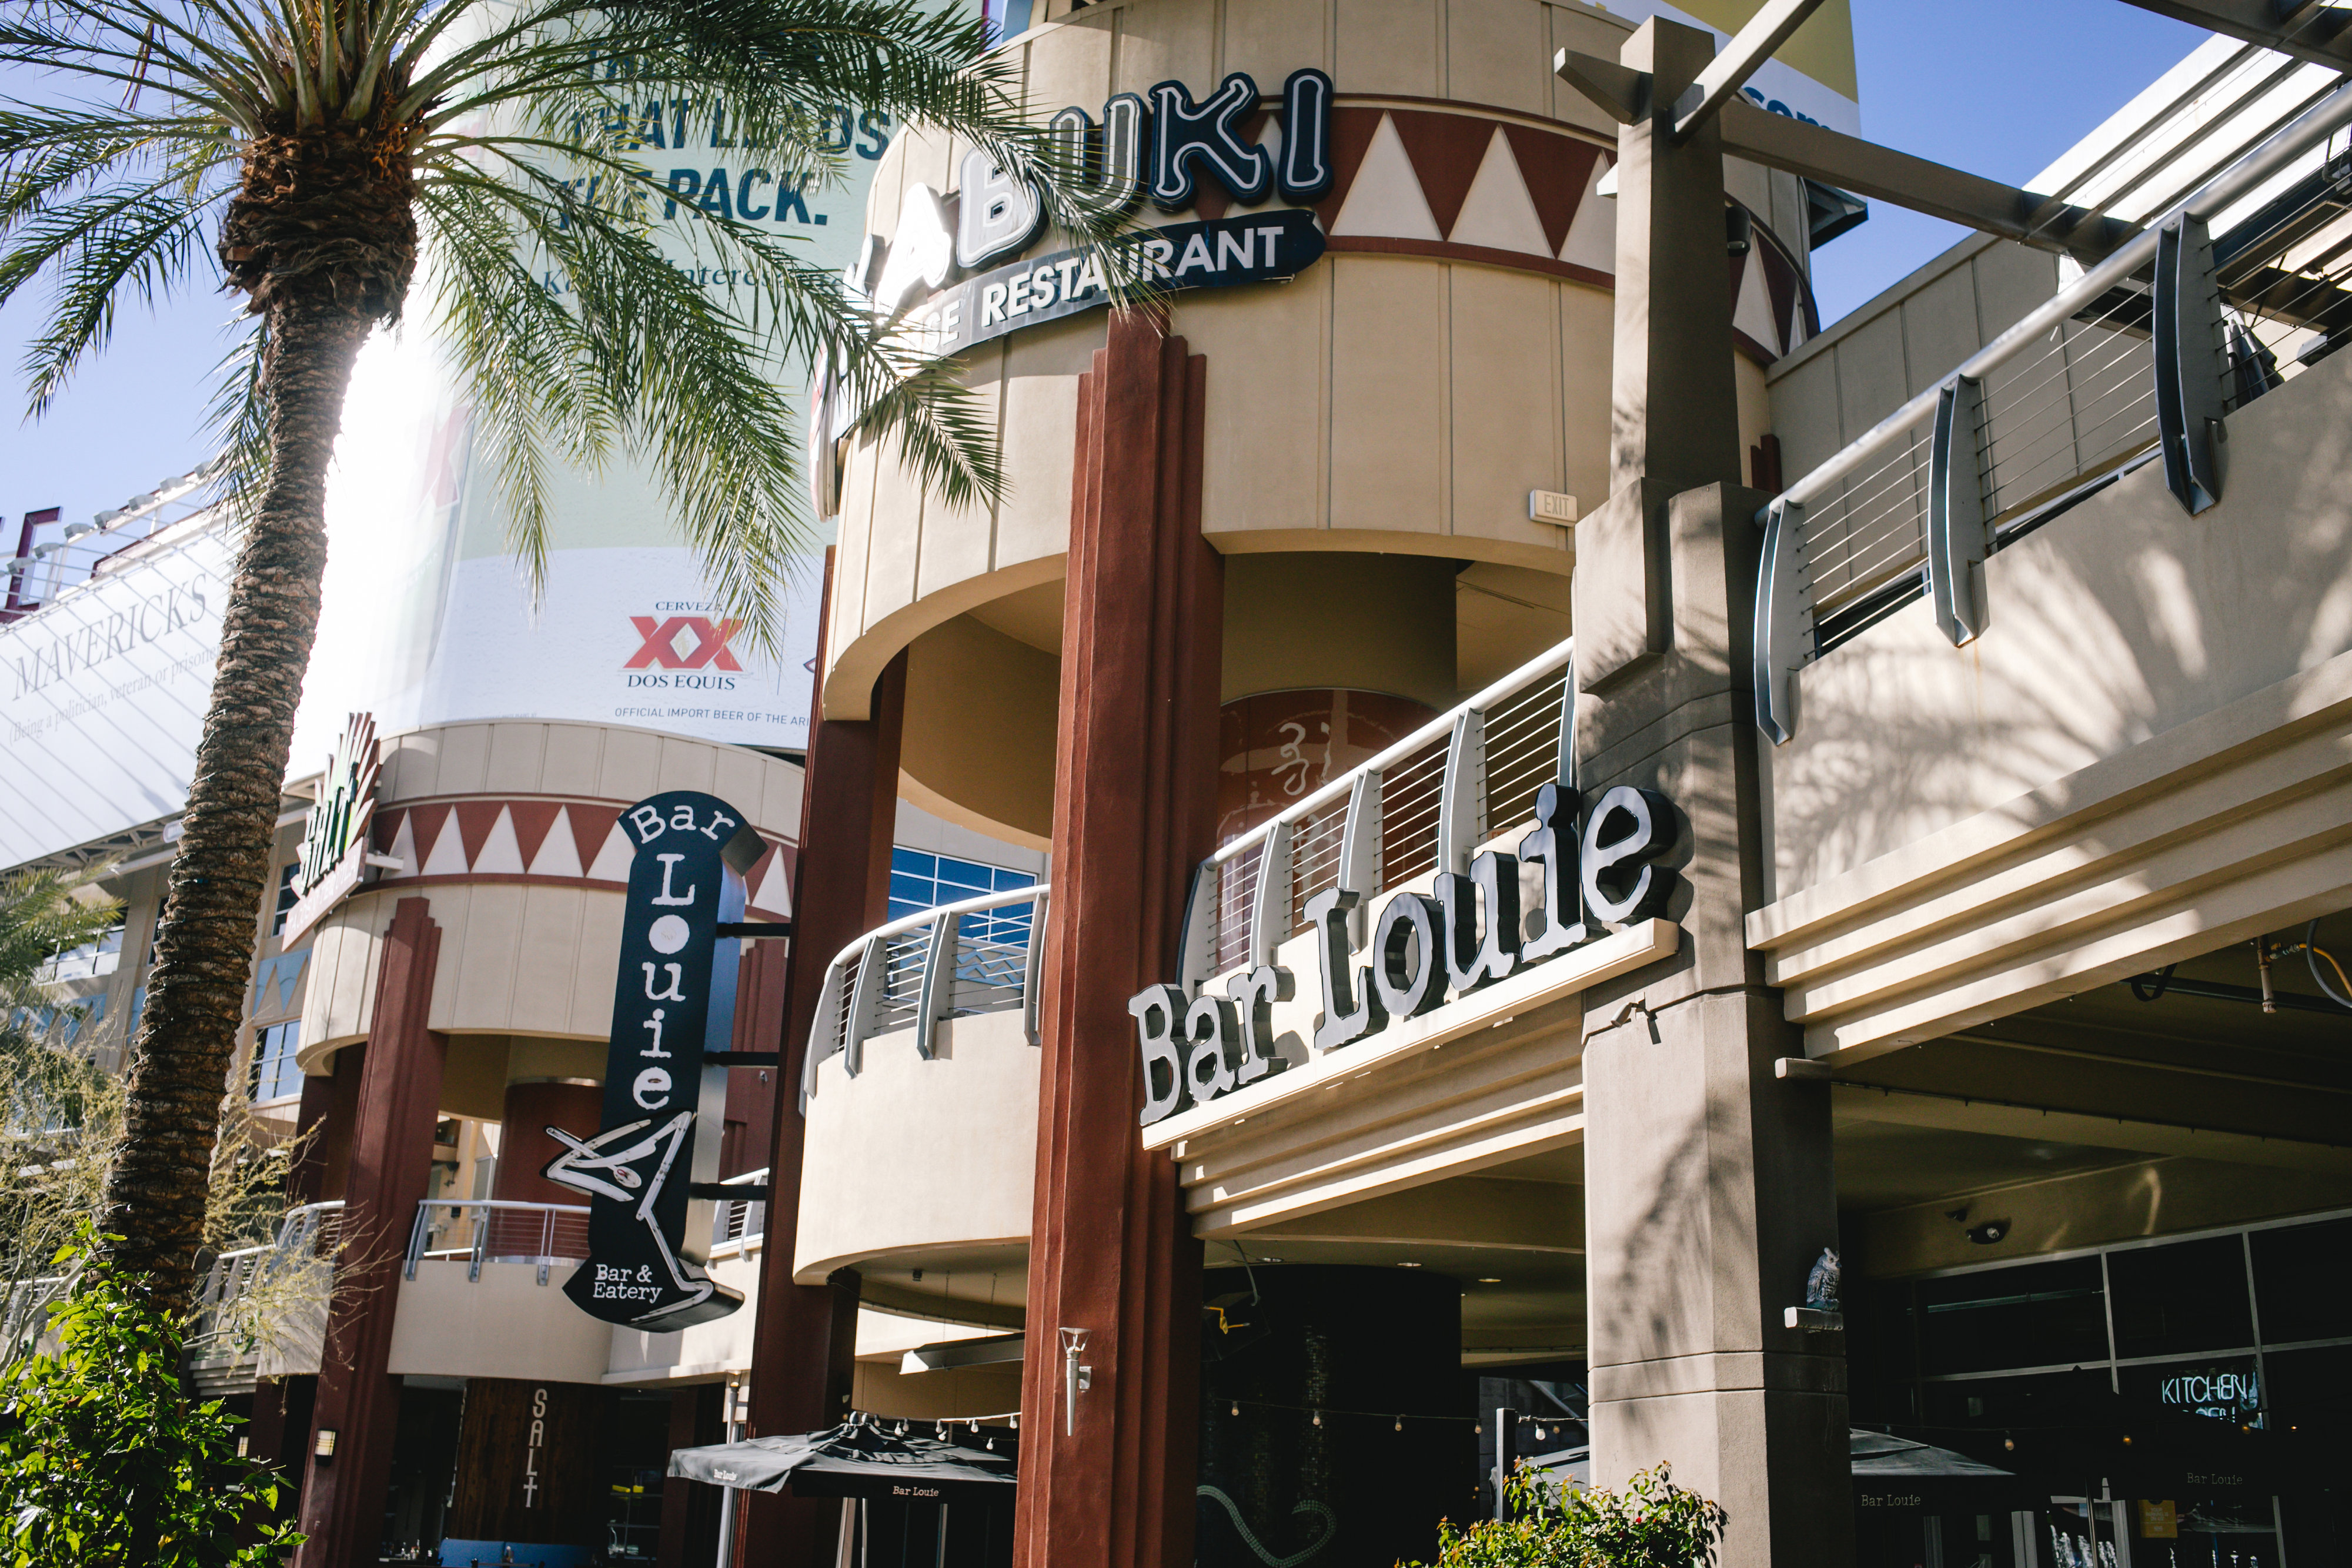 The exterior of a a building with signs for Kabuki Restaurant and Bar Louie is surrounded by palm trees on a sunny day. 